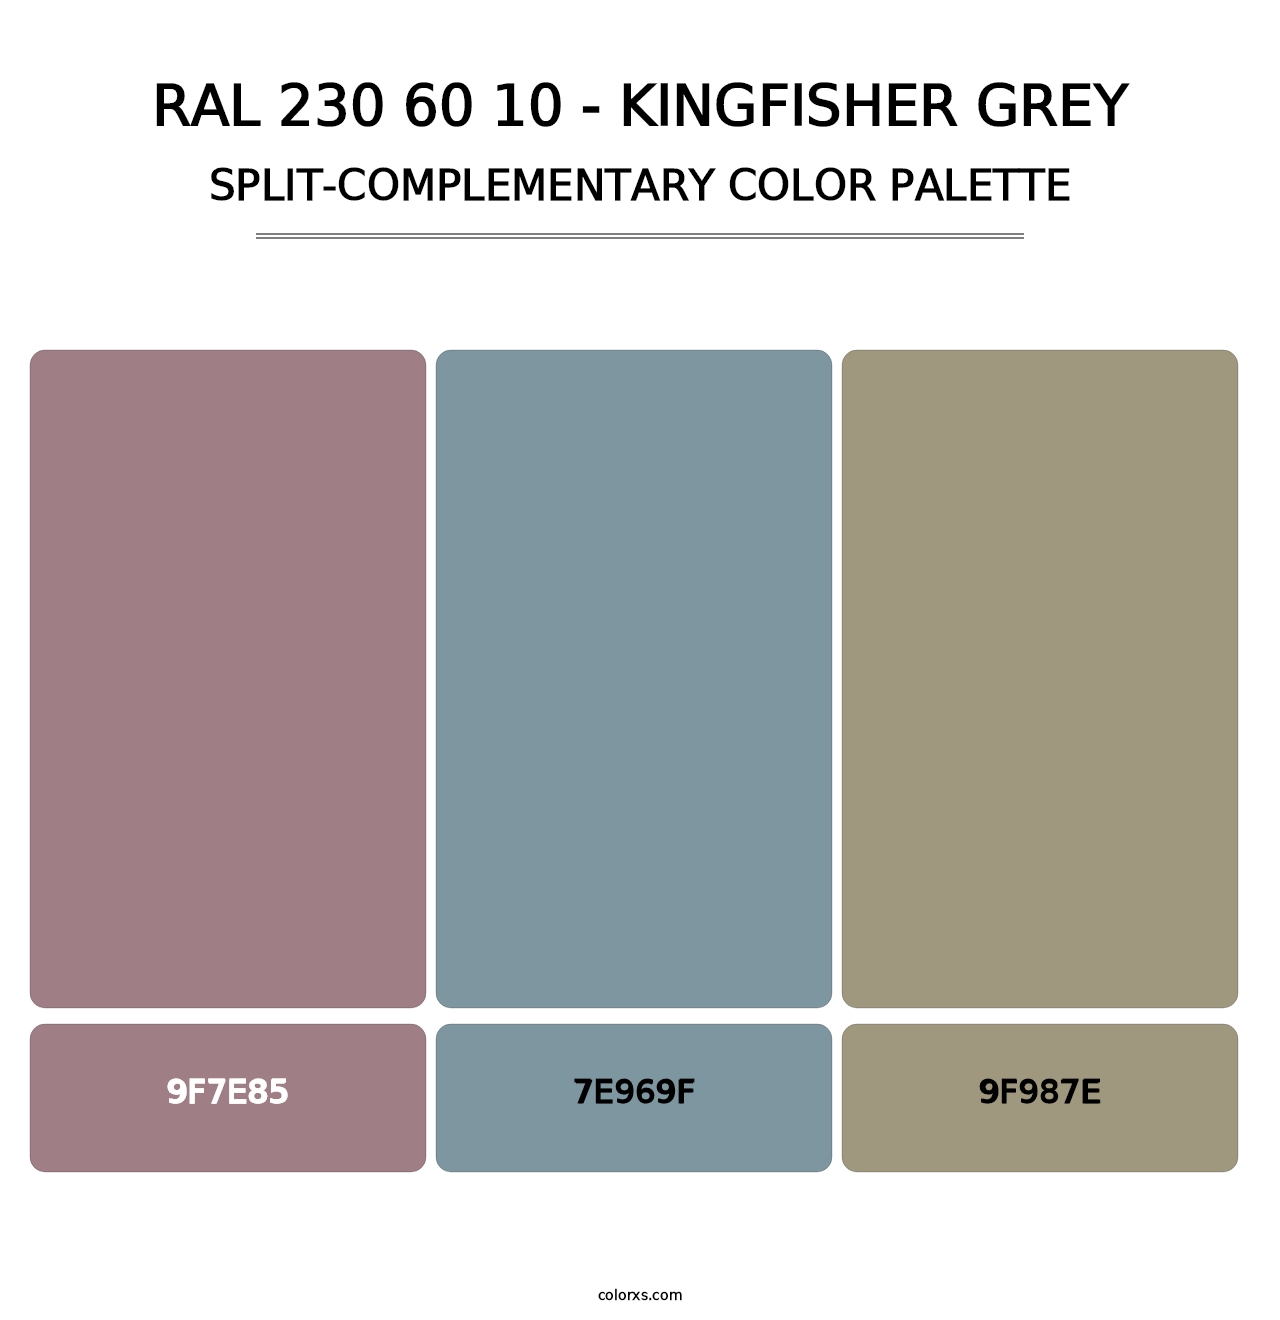 RAL 230 60 10 - Kingfisher Grey - Split-Complementary Color Palette